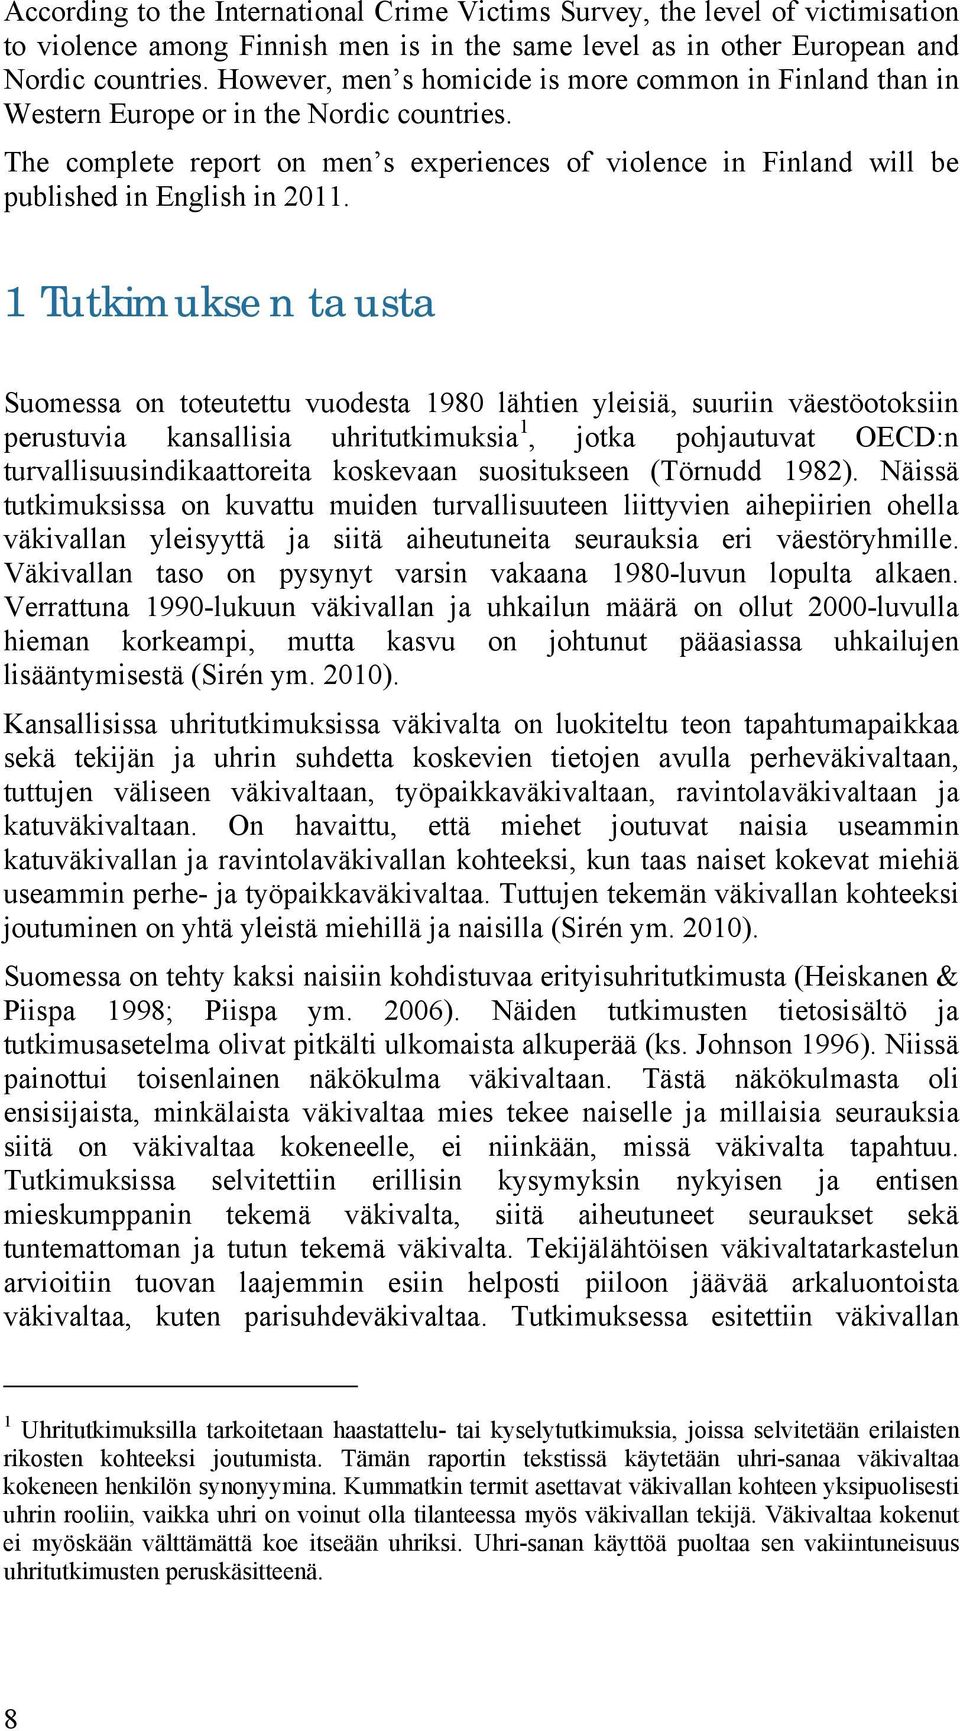 The complete report on men s experiences of violence in Finland will be published in English in 2011.